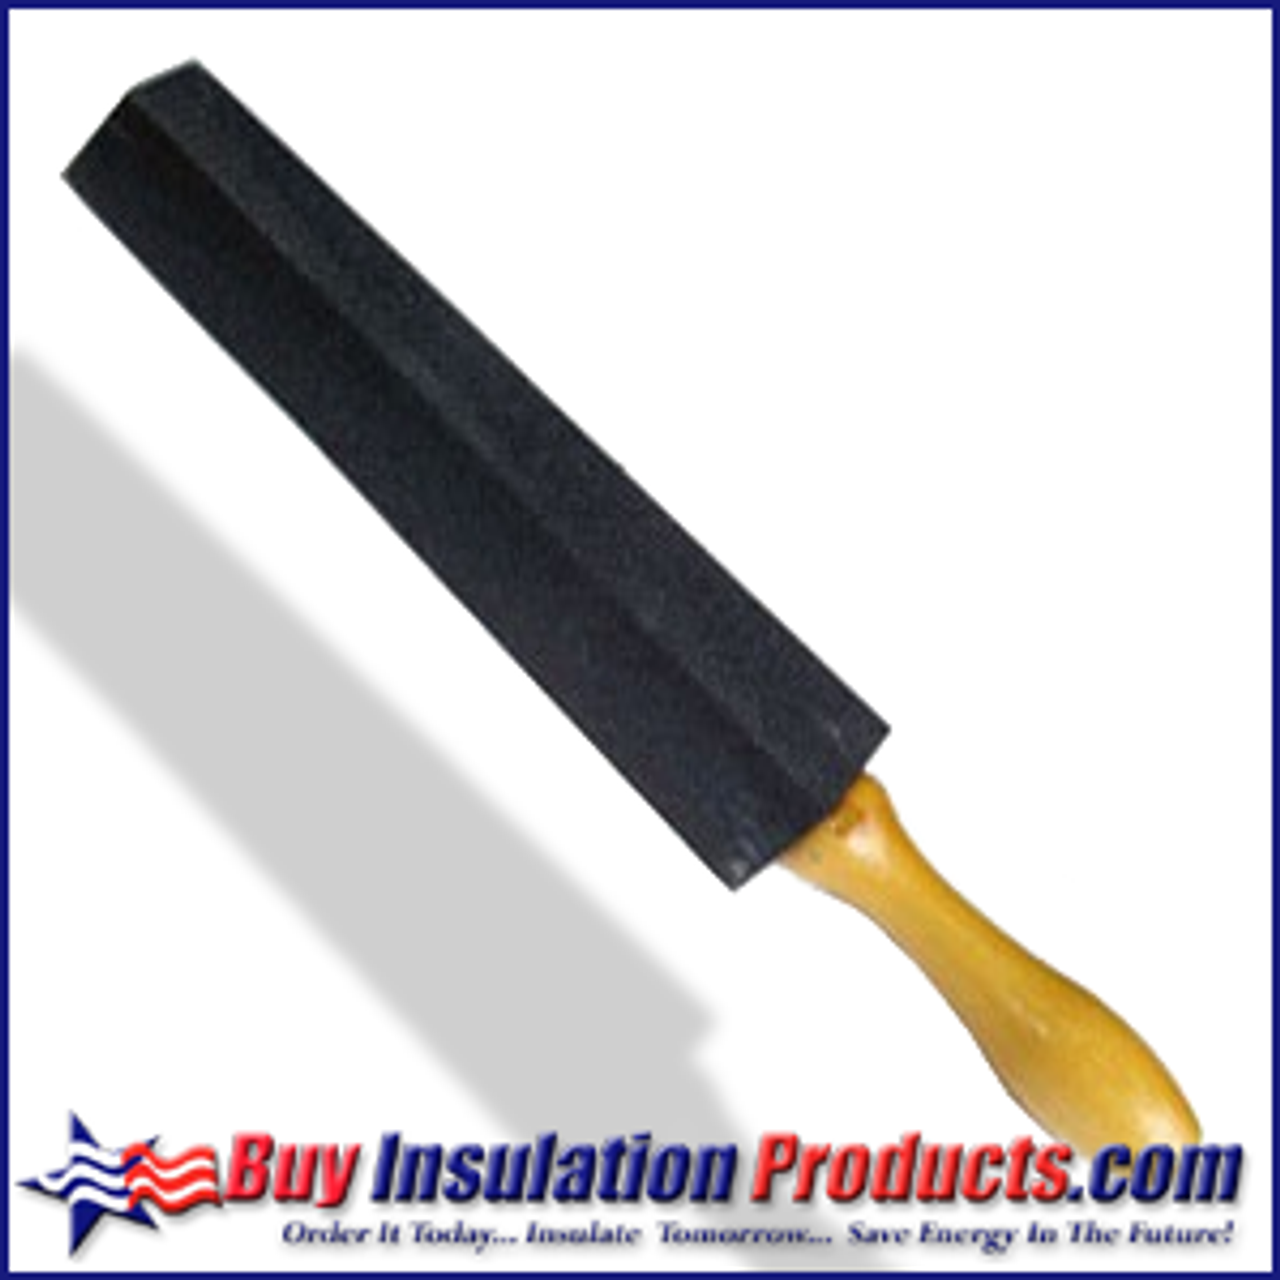 Knife sharpening stones - Hapstone Silicon Carbide Buy now!